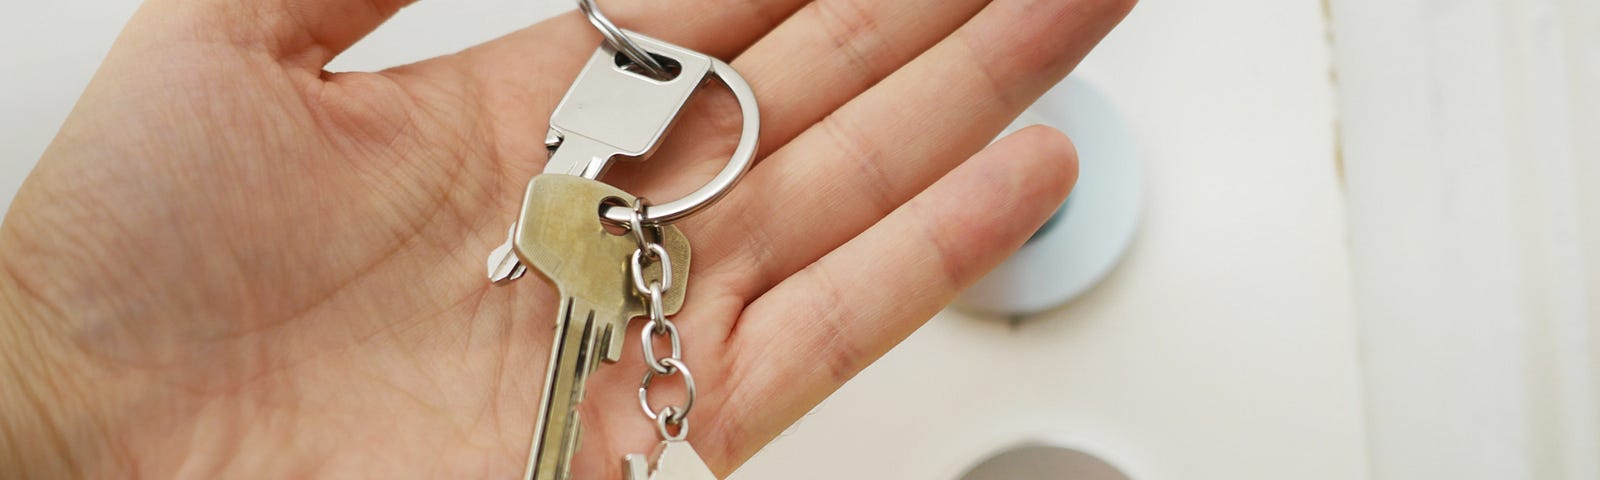 A person holding a set of house keys cupped in their palm. The closed, locked door of a house makes up the background.